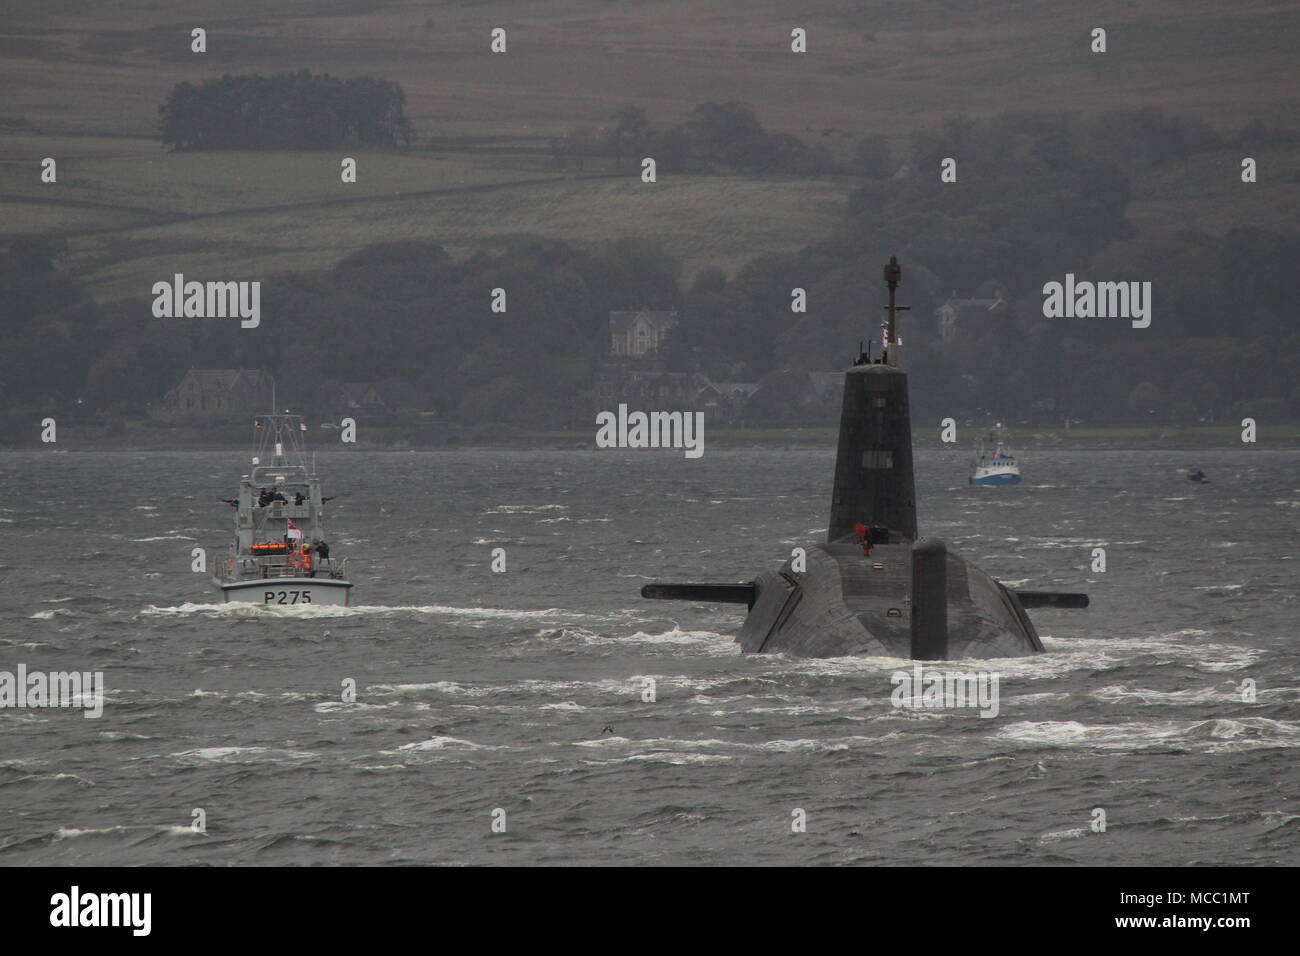 HMS Victorious (S29), a Vanguard-class submarine operated by the Royal Navy, on an inbound journey to the Faslane naval base, with HMS Raider (P275). Stock Photo